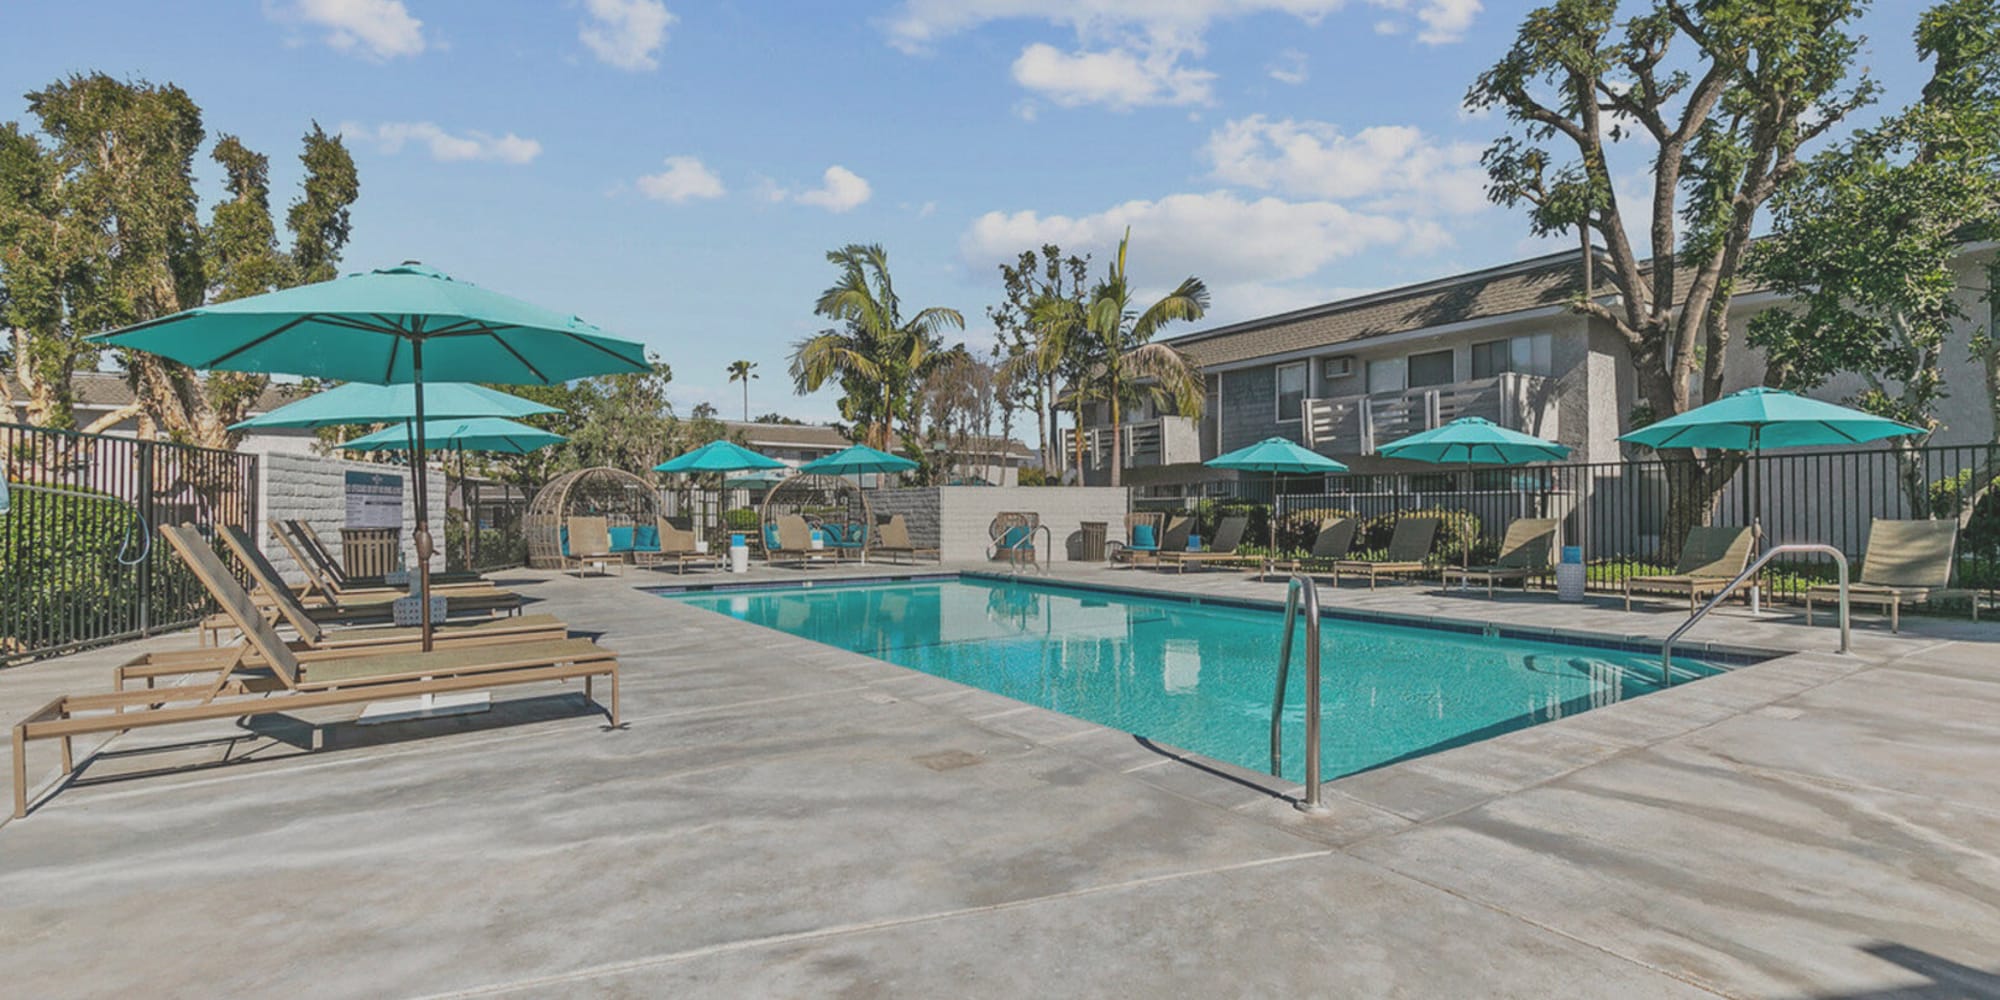 Swimming pool and luxurious outdoor amenities at Twelve31 in West Covina, California